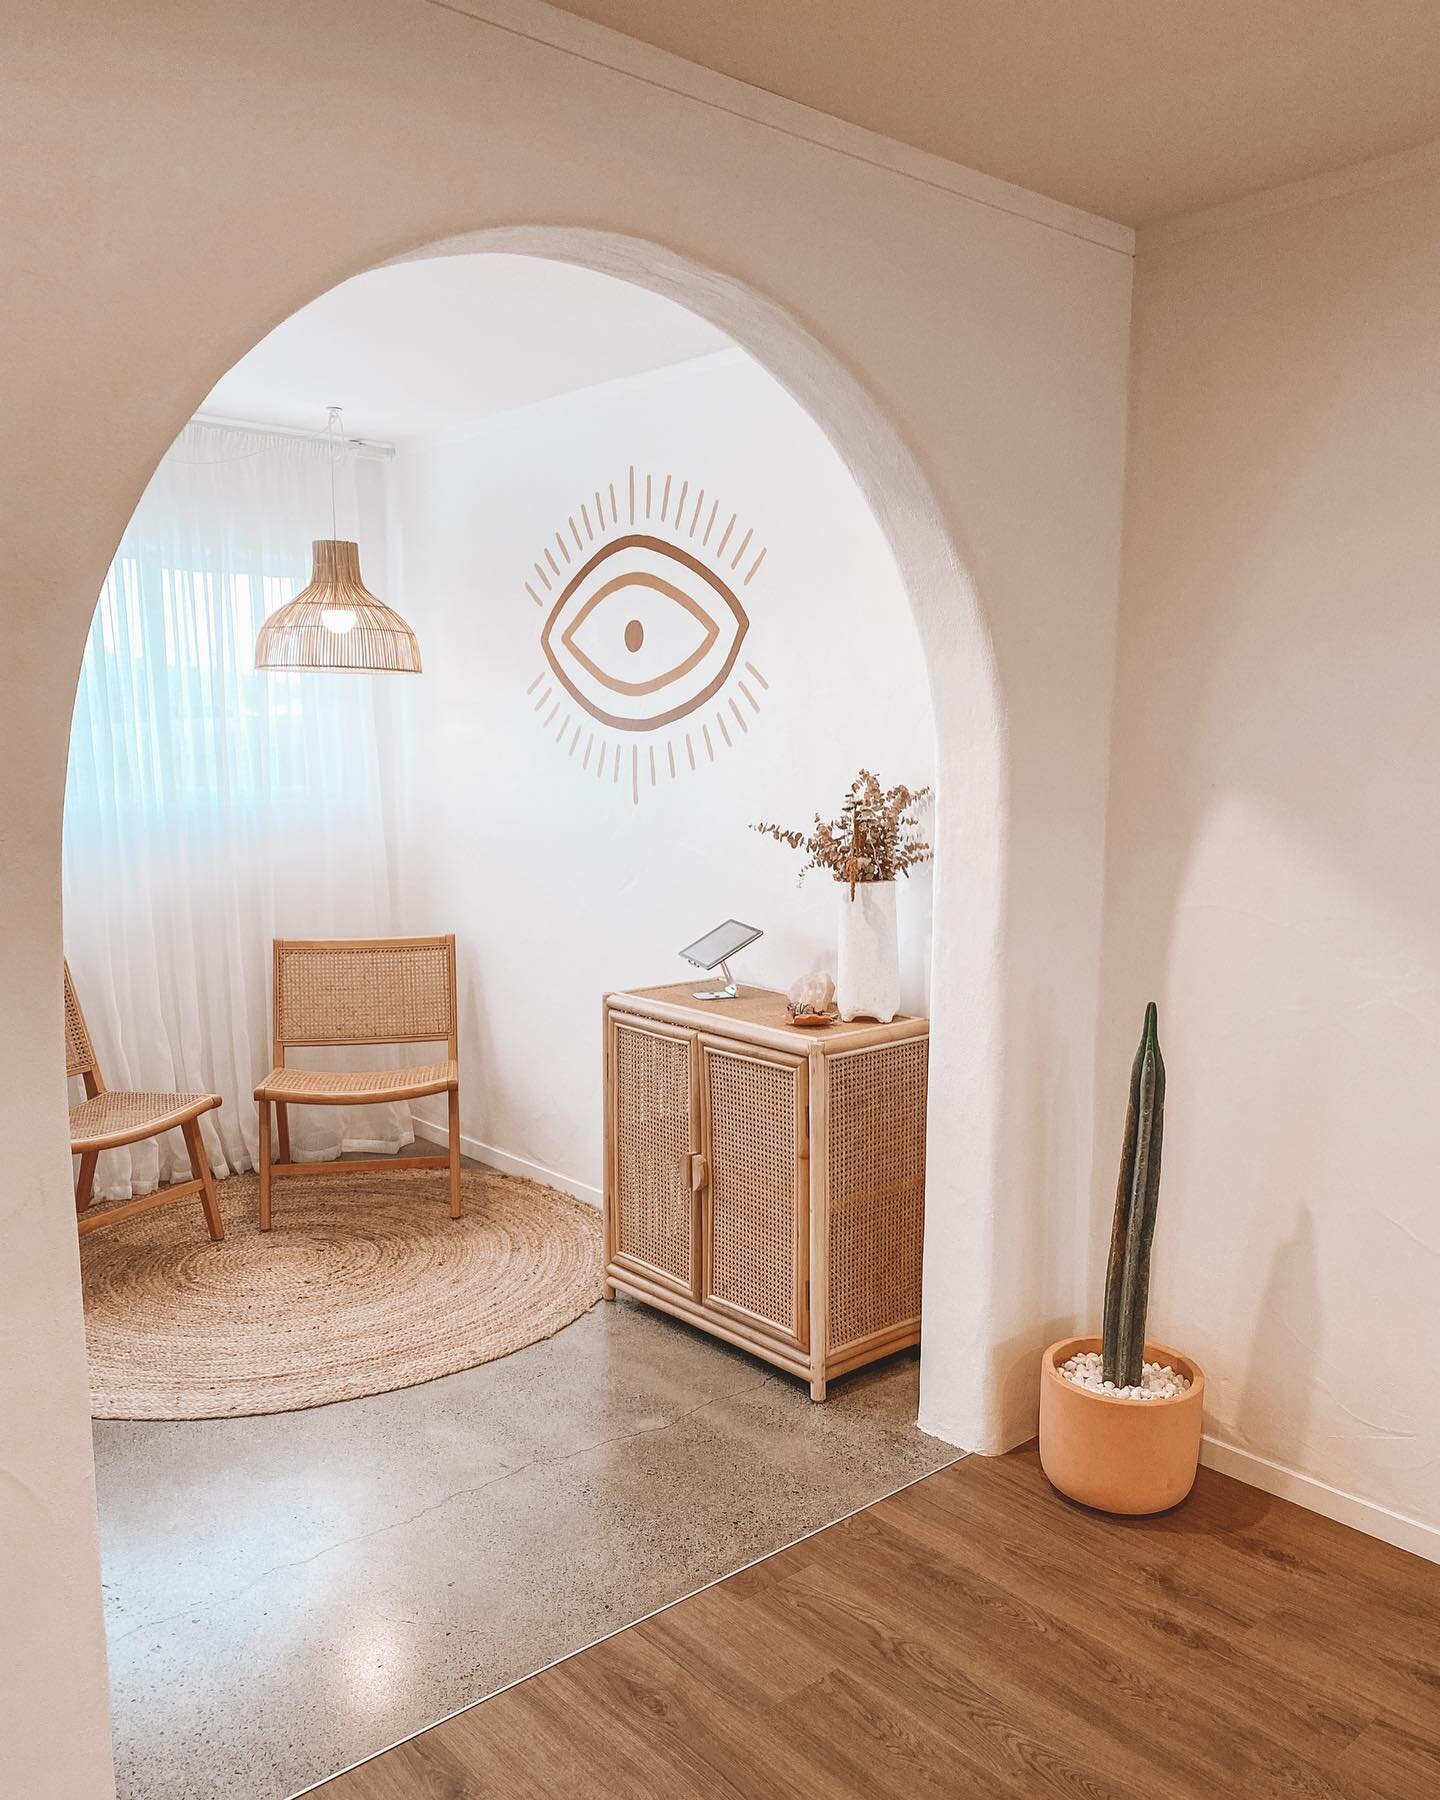 Welcome to your new space to move, unwind &amp; connect&hellip; Mahāna Yoga